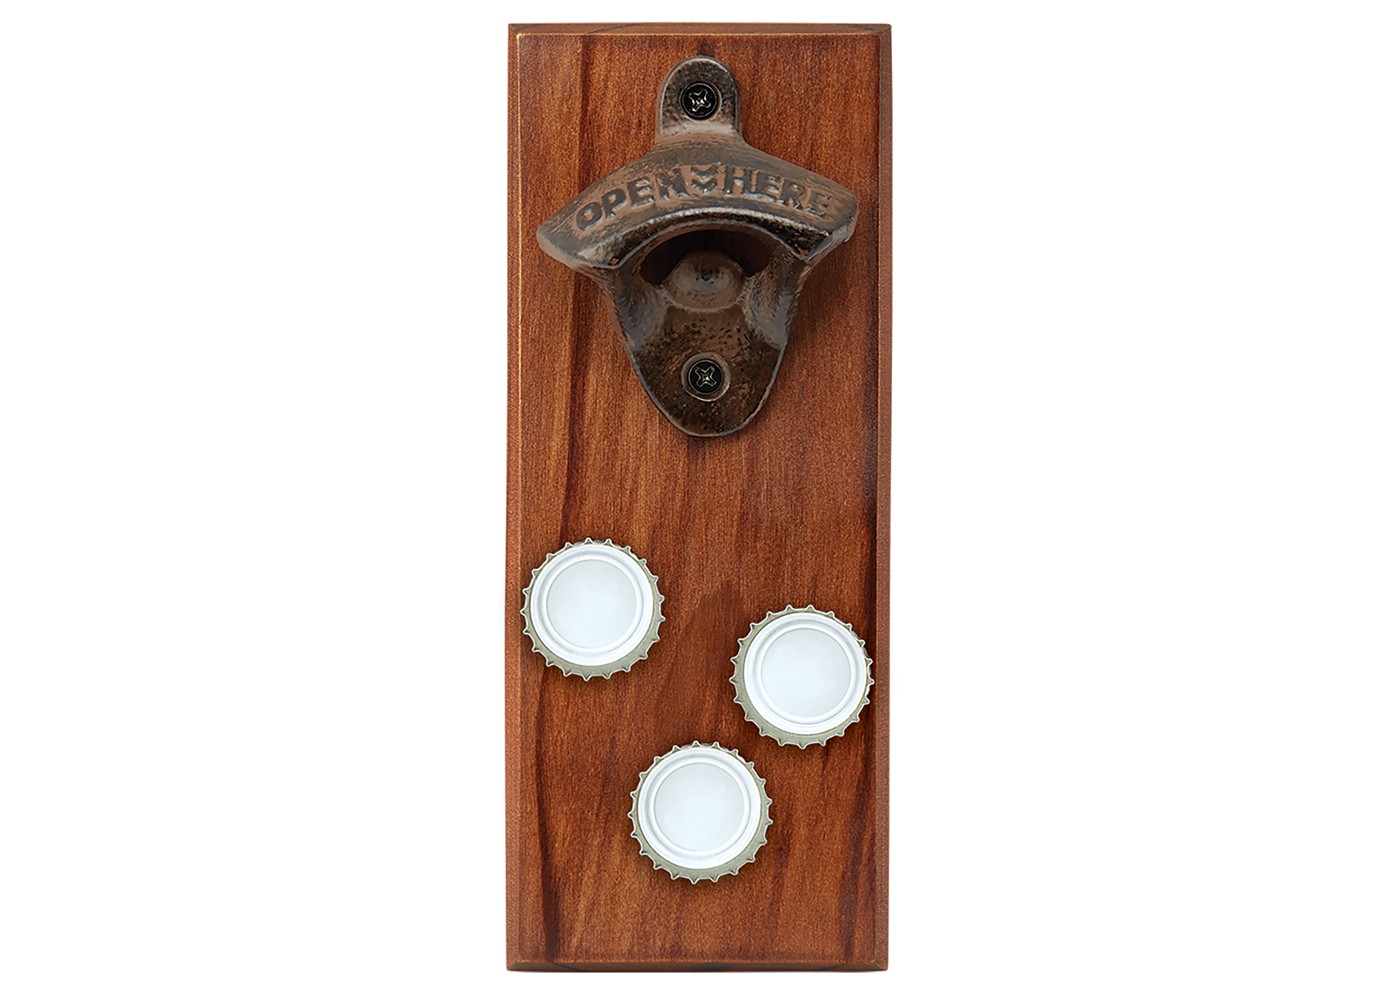 Bottle Openers Brown - Refinery - image 1 of 1